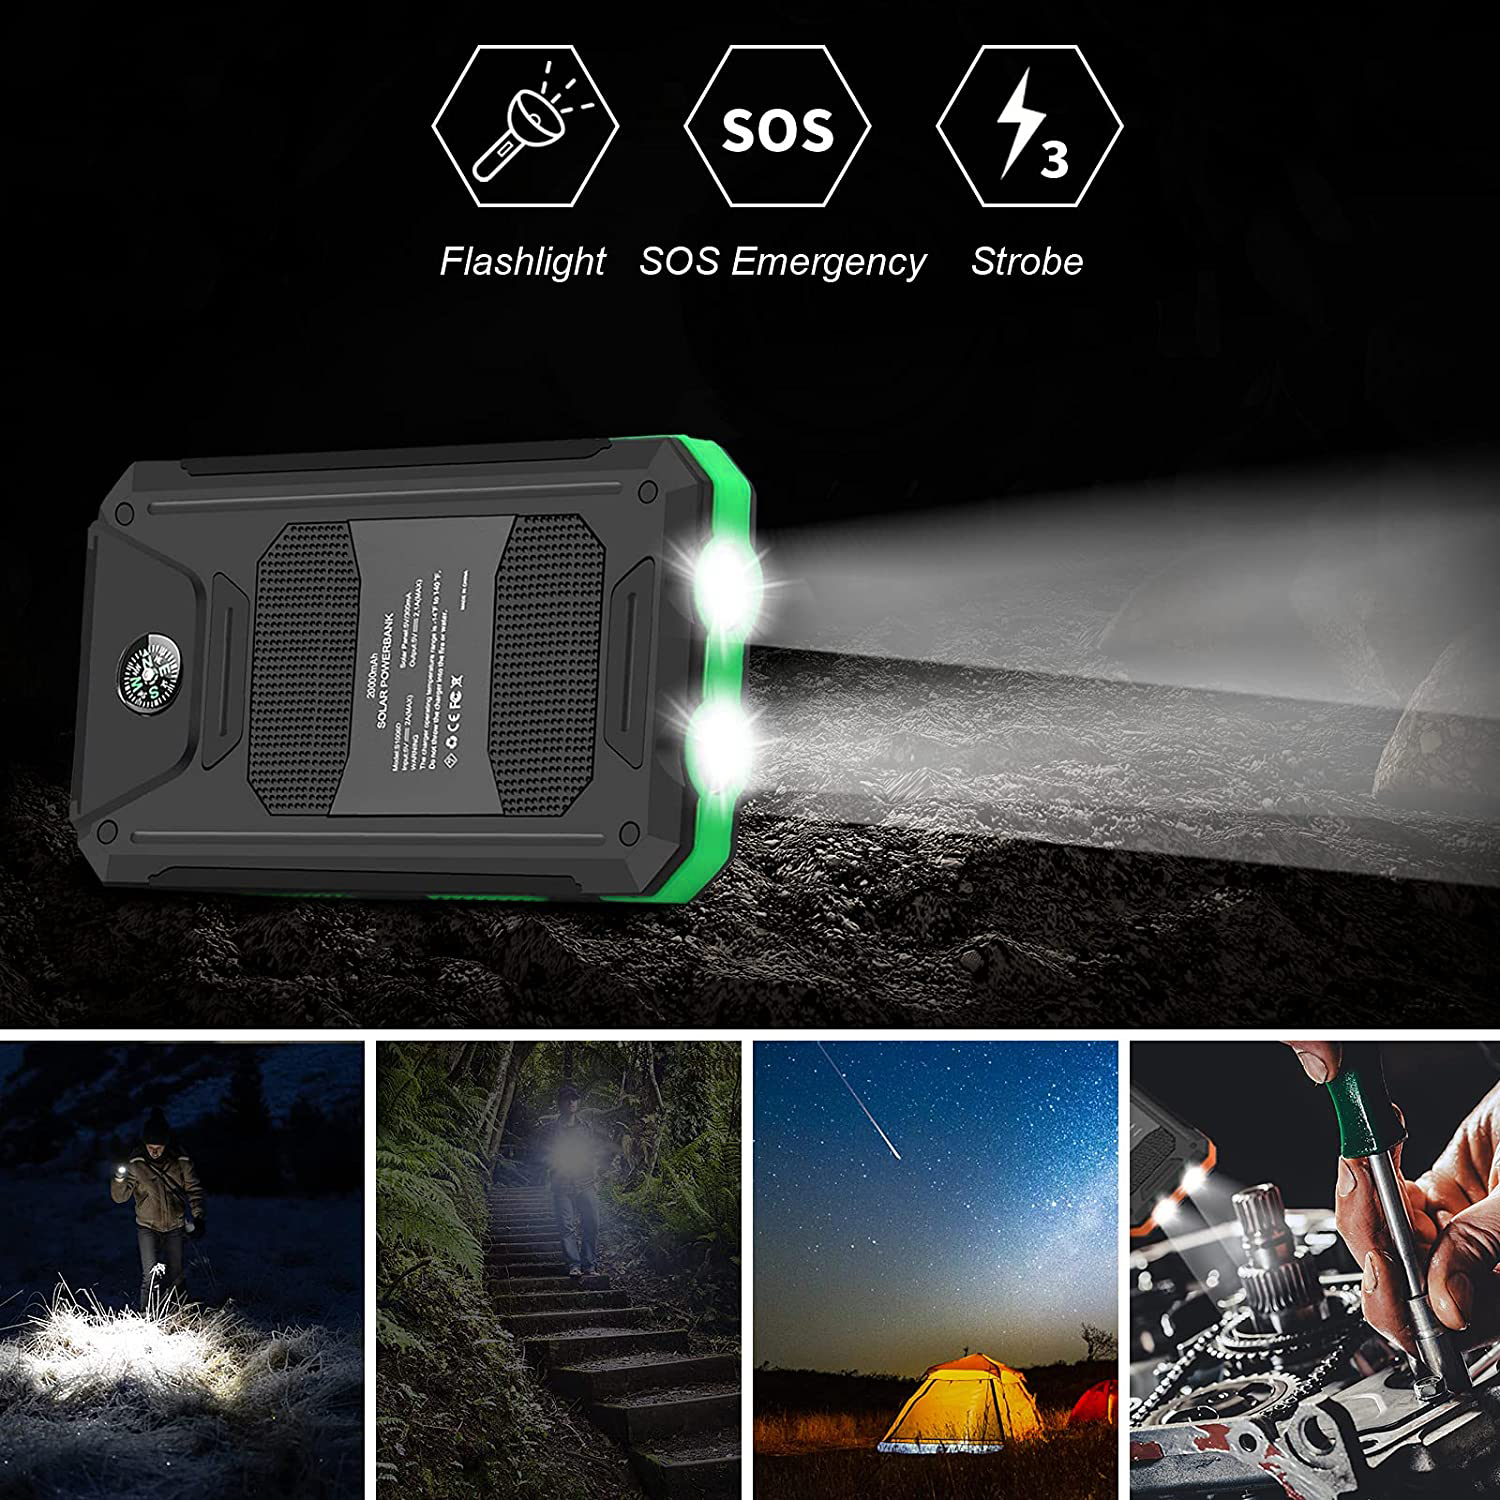 20000mAh Solar Charger for Cell Phone iphone, Portable Solar Power Bank with Dual 5V USB Ports, 2 Led Light Flashlight, Compass Battery Pack for Outdoor Camping Hiking(Green) - image 5 of 7